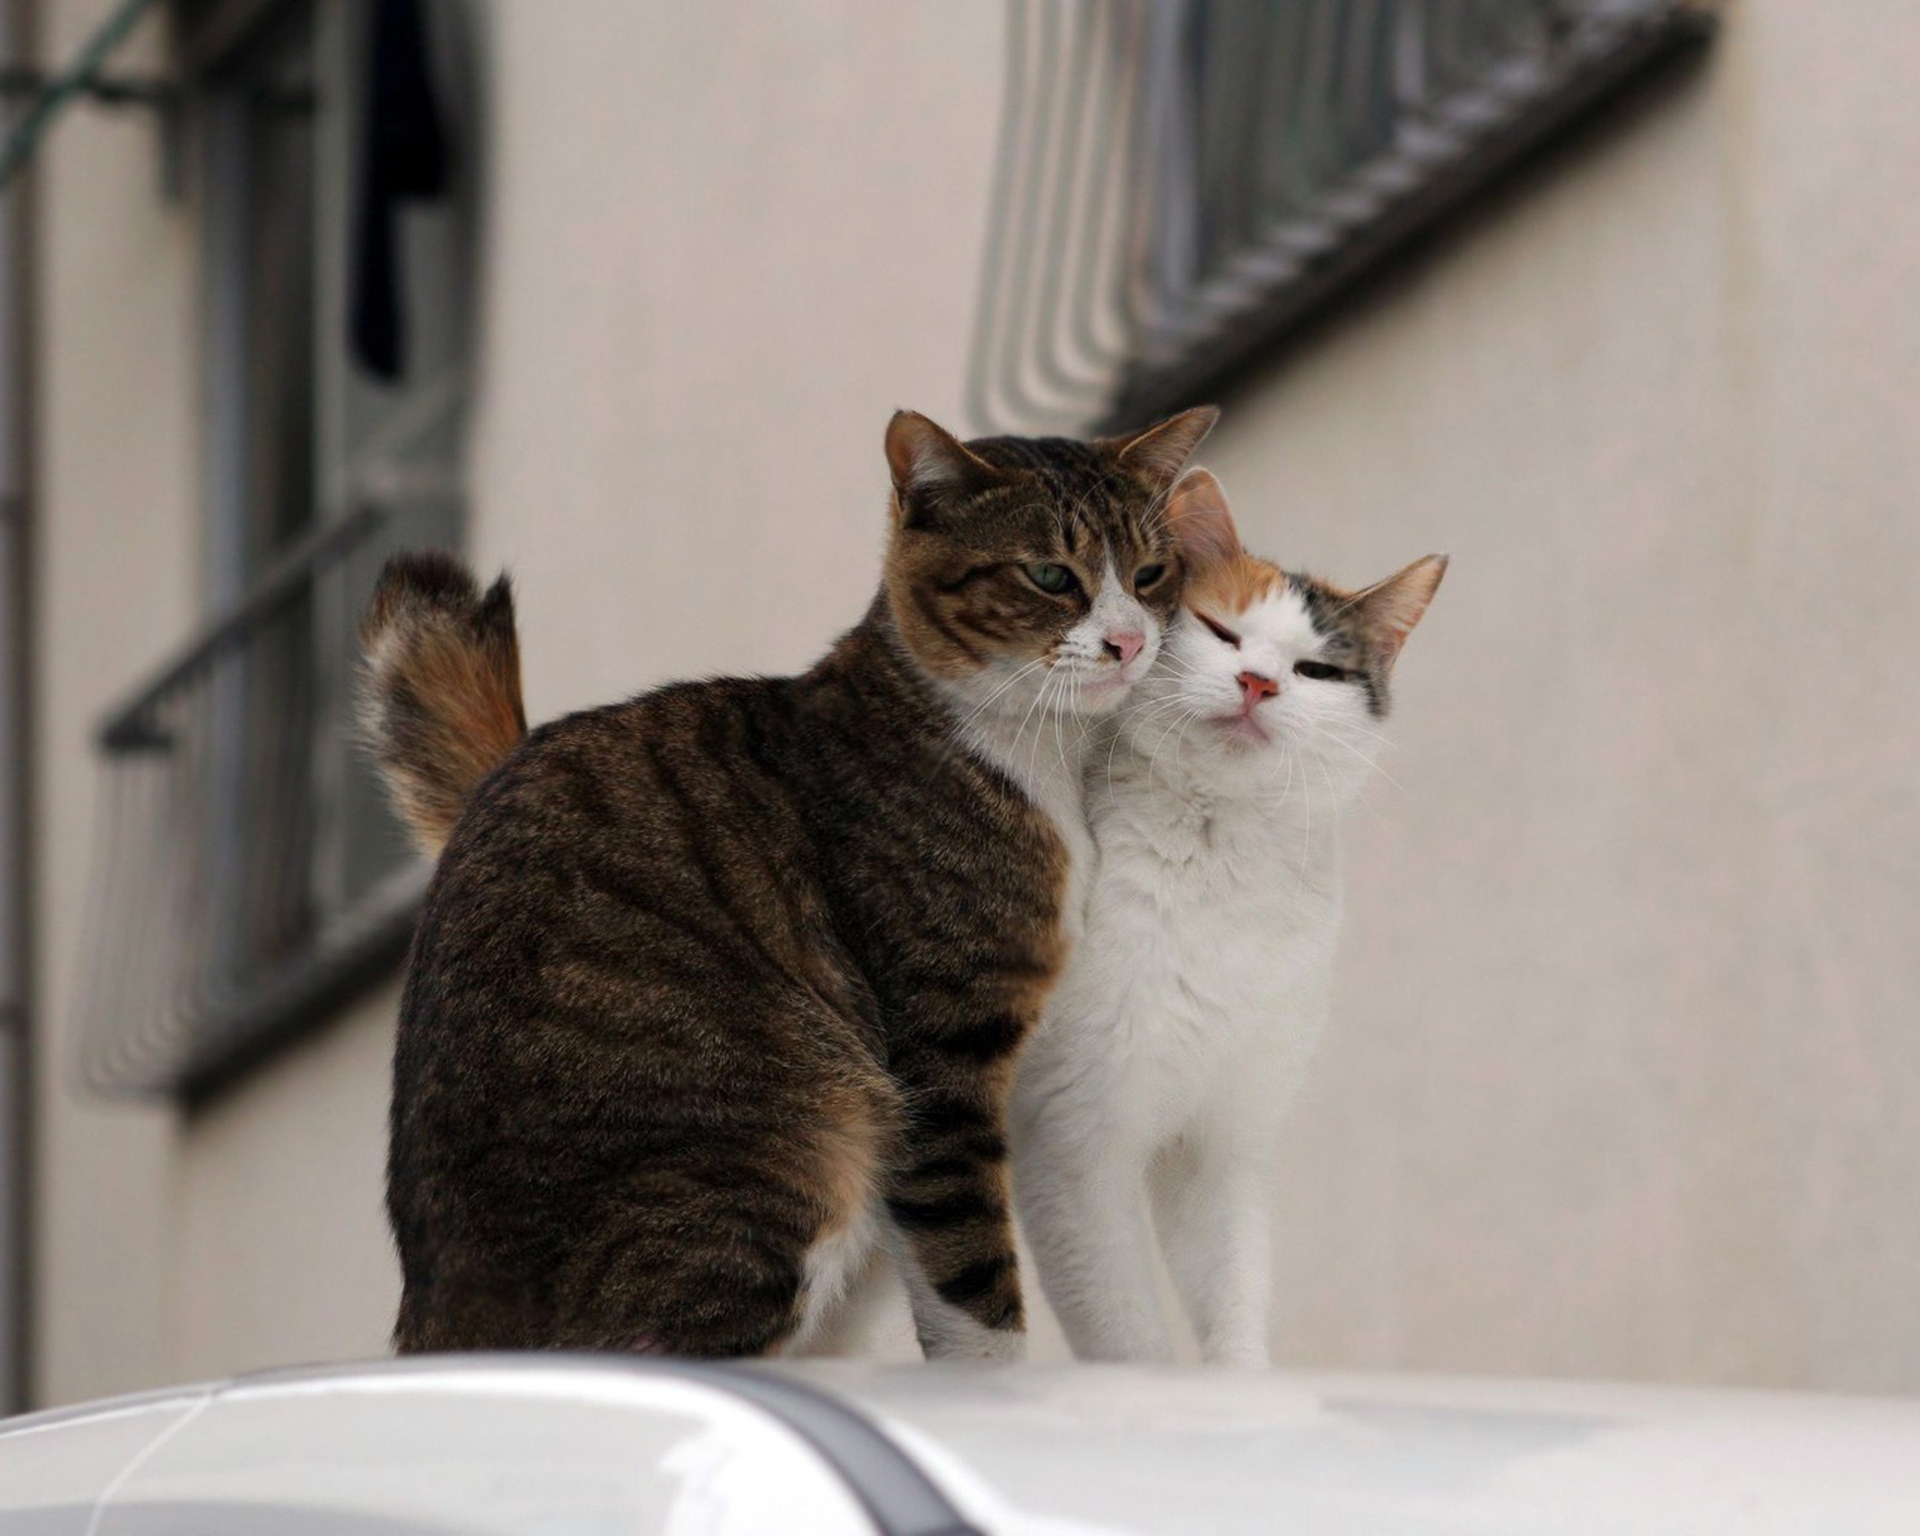 Windows Backgrounds cats, couple, animals, pair, care, tenderness